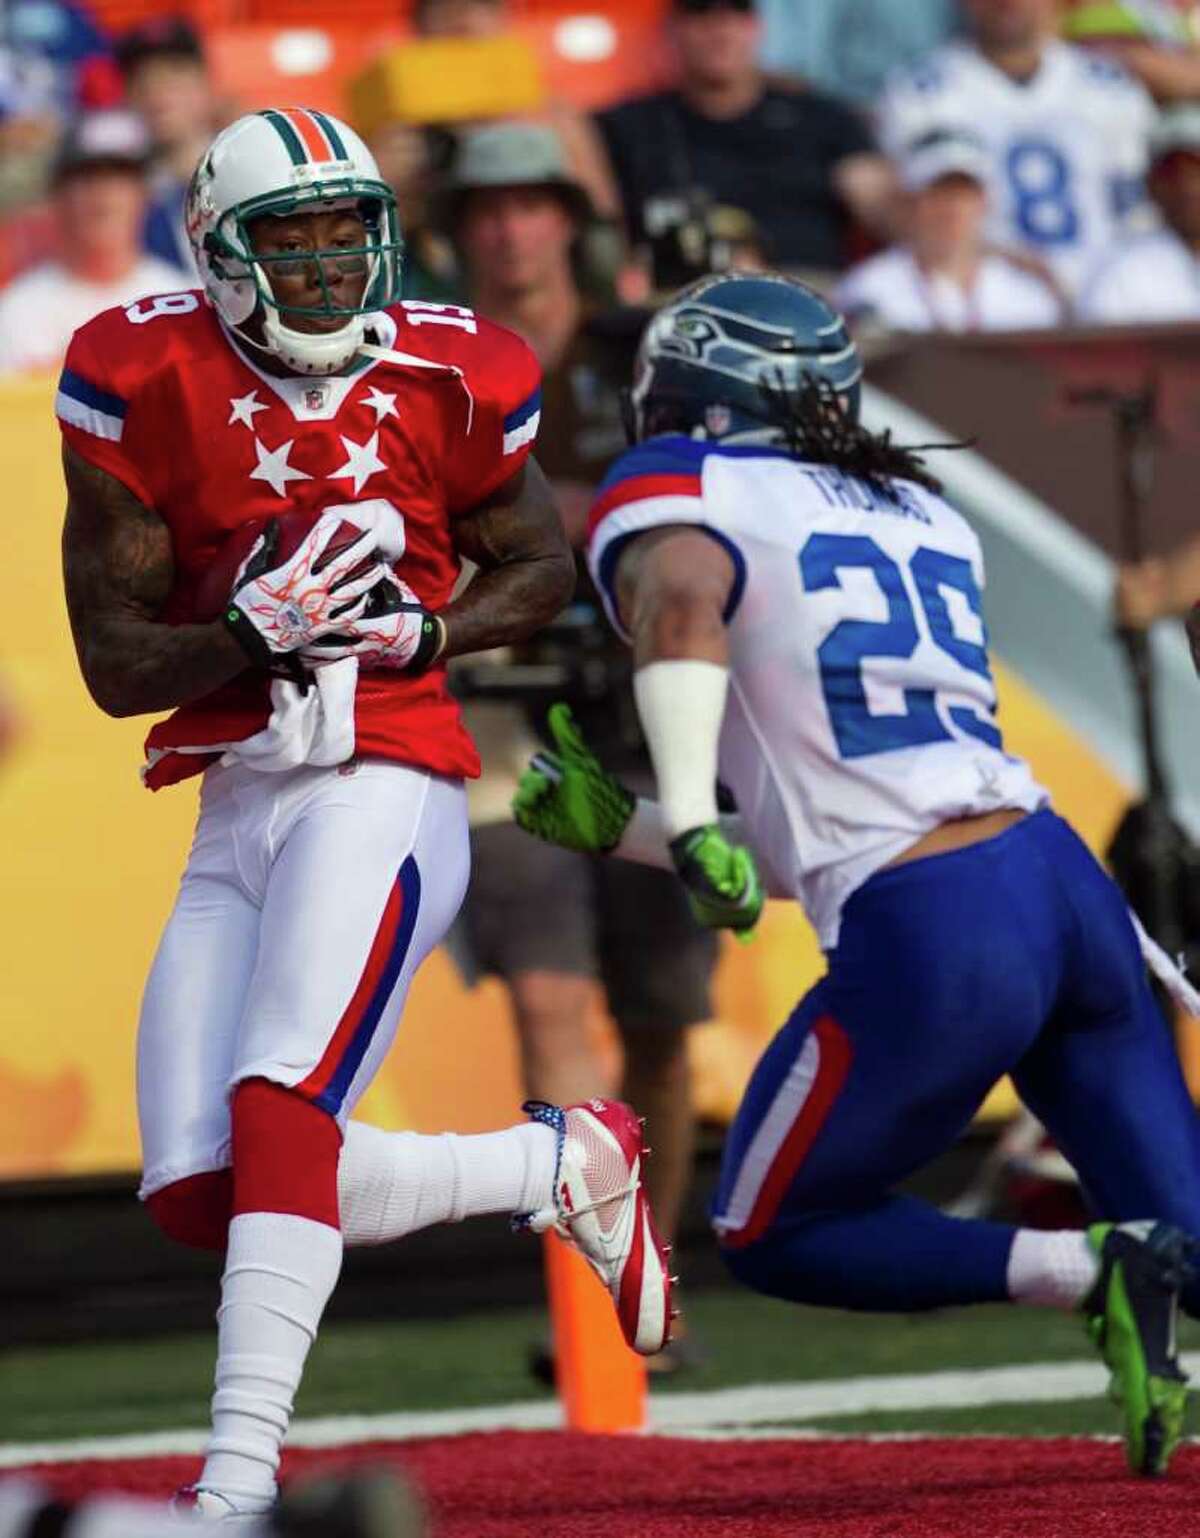 The AFC's Brandon Marshall beats Earl Thomas for one of his four touchdown receptions.